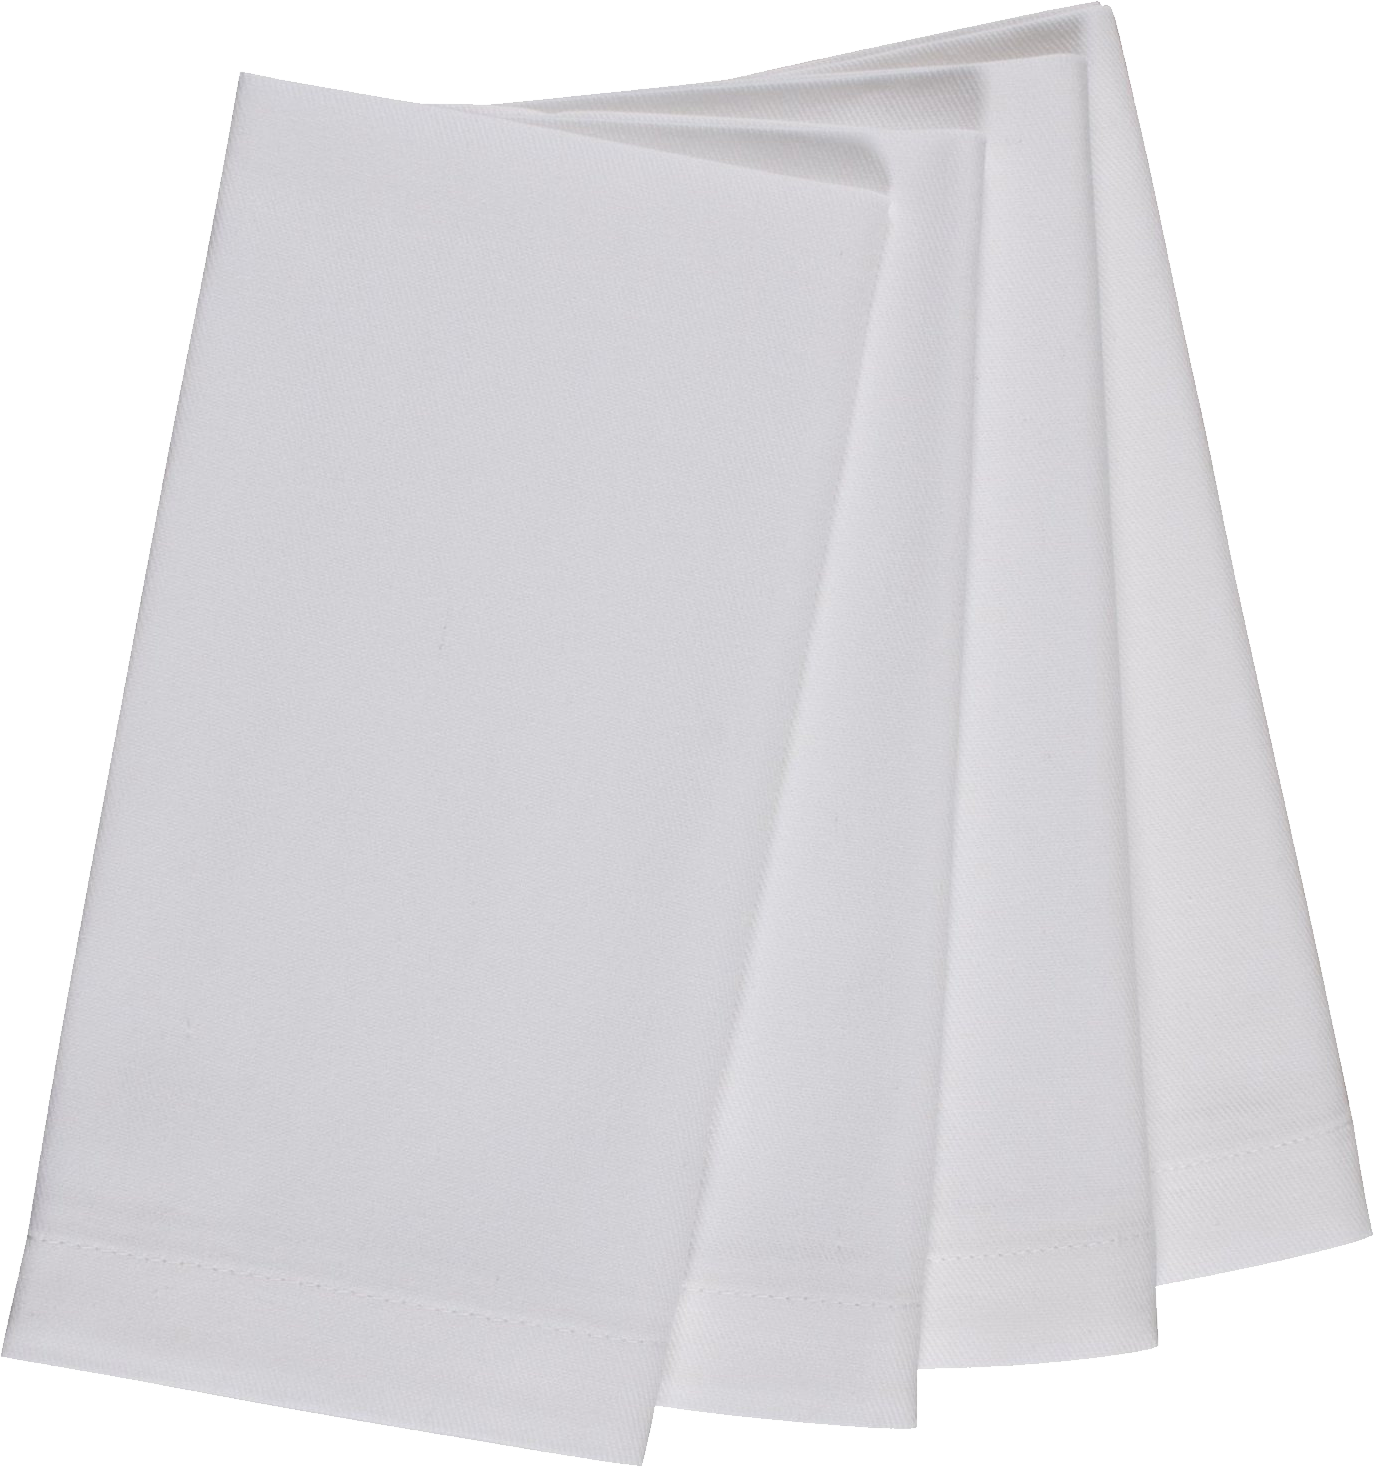 Napkin PNG Images HD